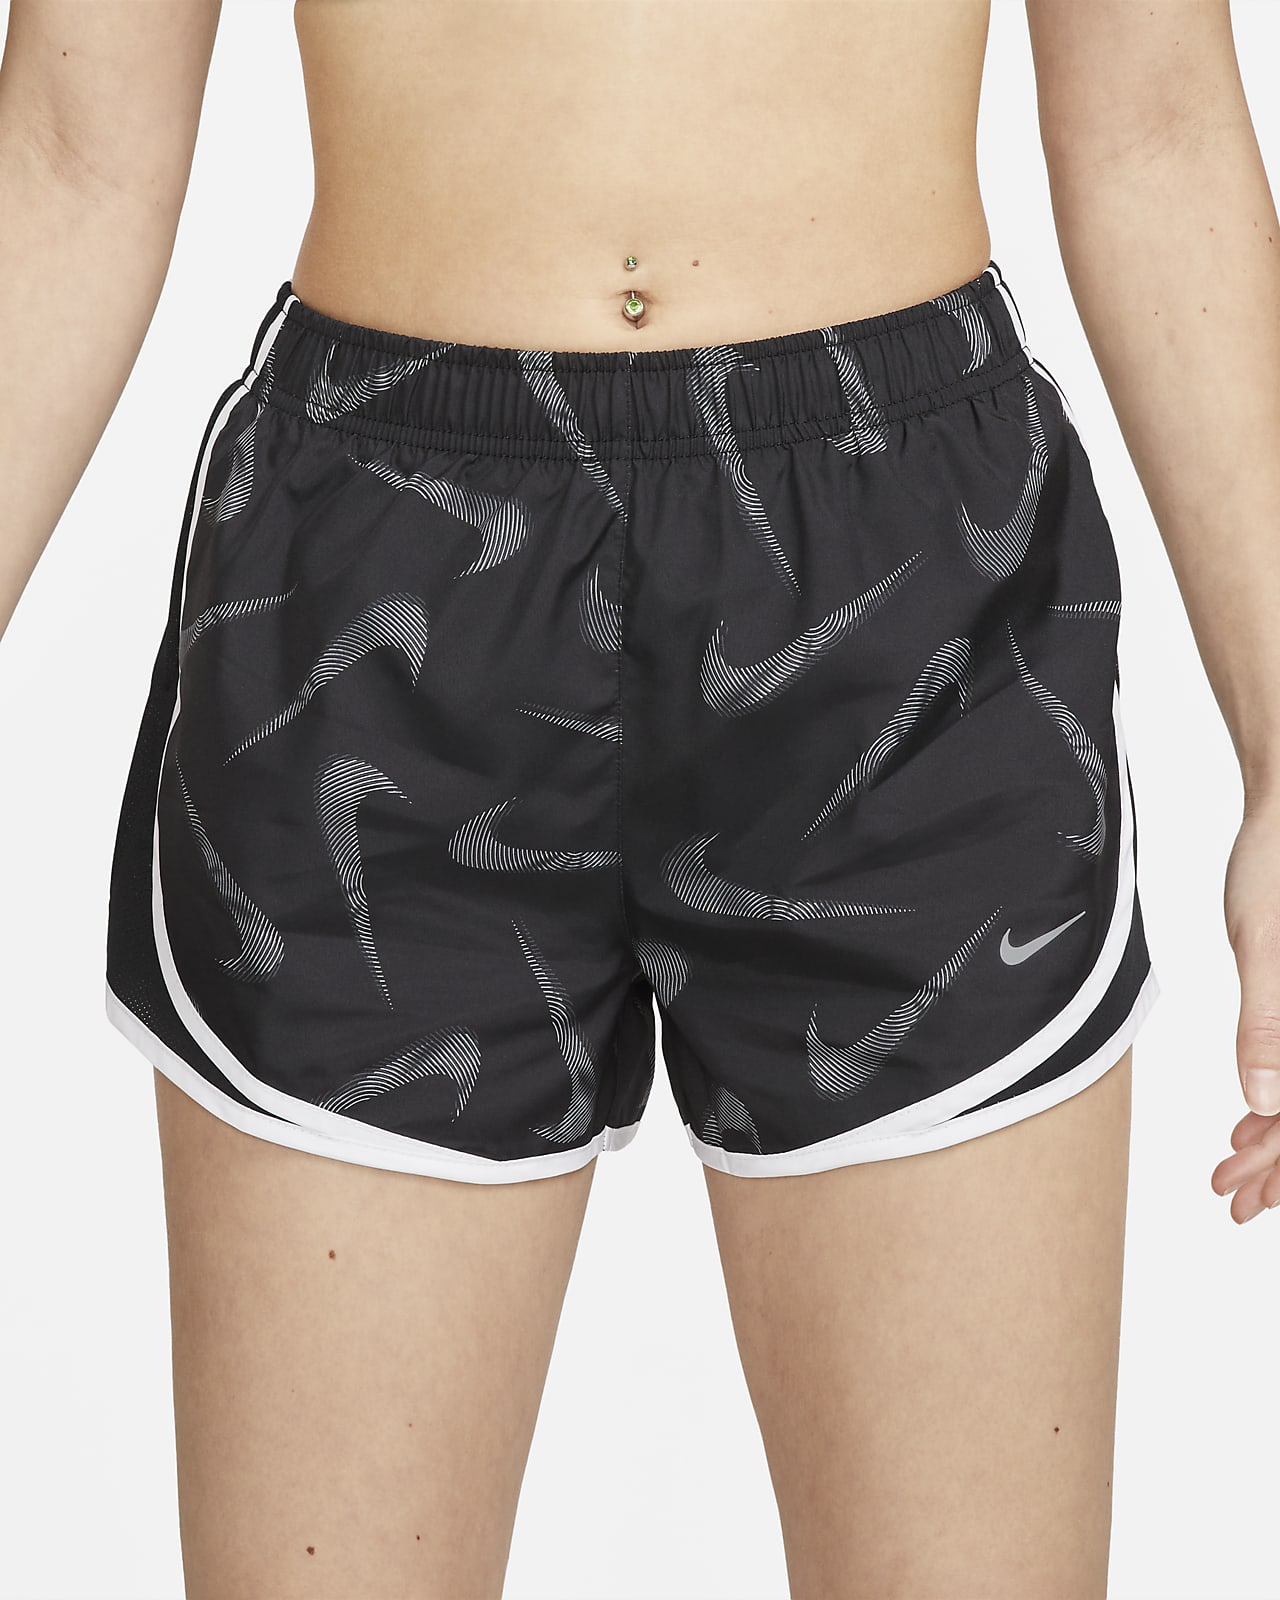 https://static.nike.com/a/images/t_PDP_1280_v1/f_auto,q_auto:eco/2f43ee23-1ace-4195-a334-0fc646b942a9/tempo-swoosh-womens-dri-fit-brief-lined-printed-running-shorts-RttxgN.png